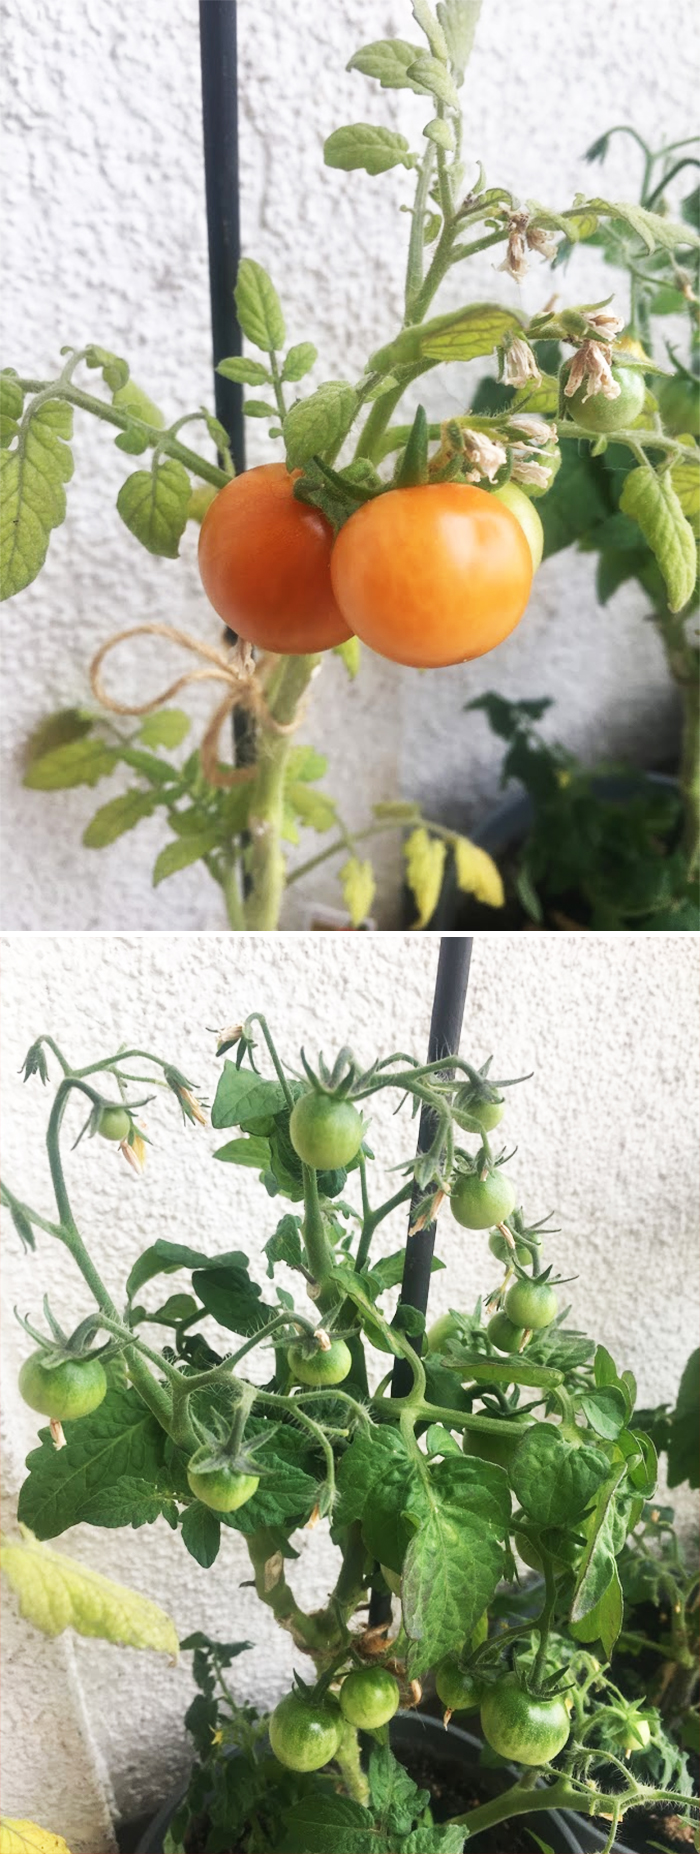 This Year I Decided To Grow Tomatoes Instead Of Flowers On My Balcony. Turned Out Great! I Think I'll Keep This Idea And Grow More Edible Goodies Next Year